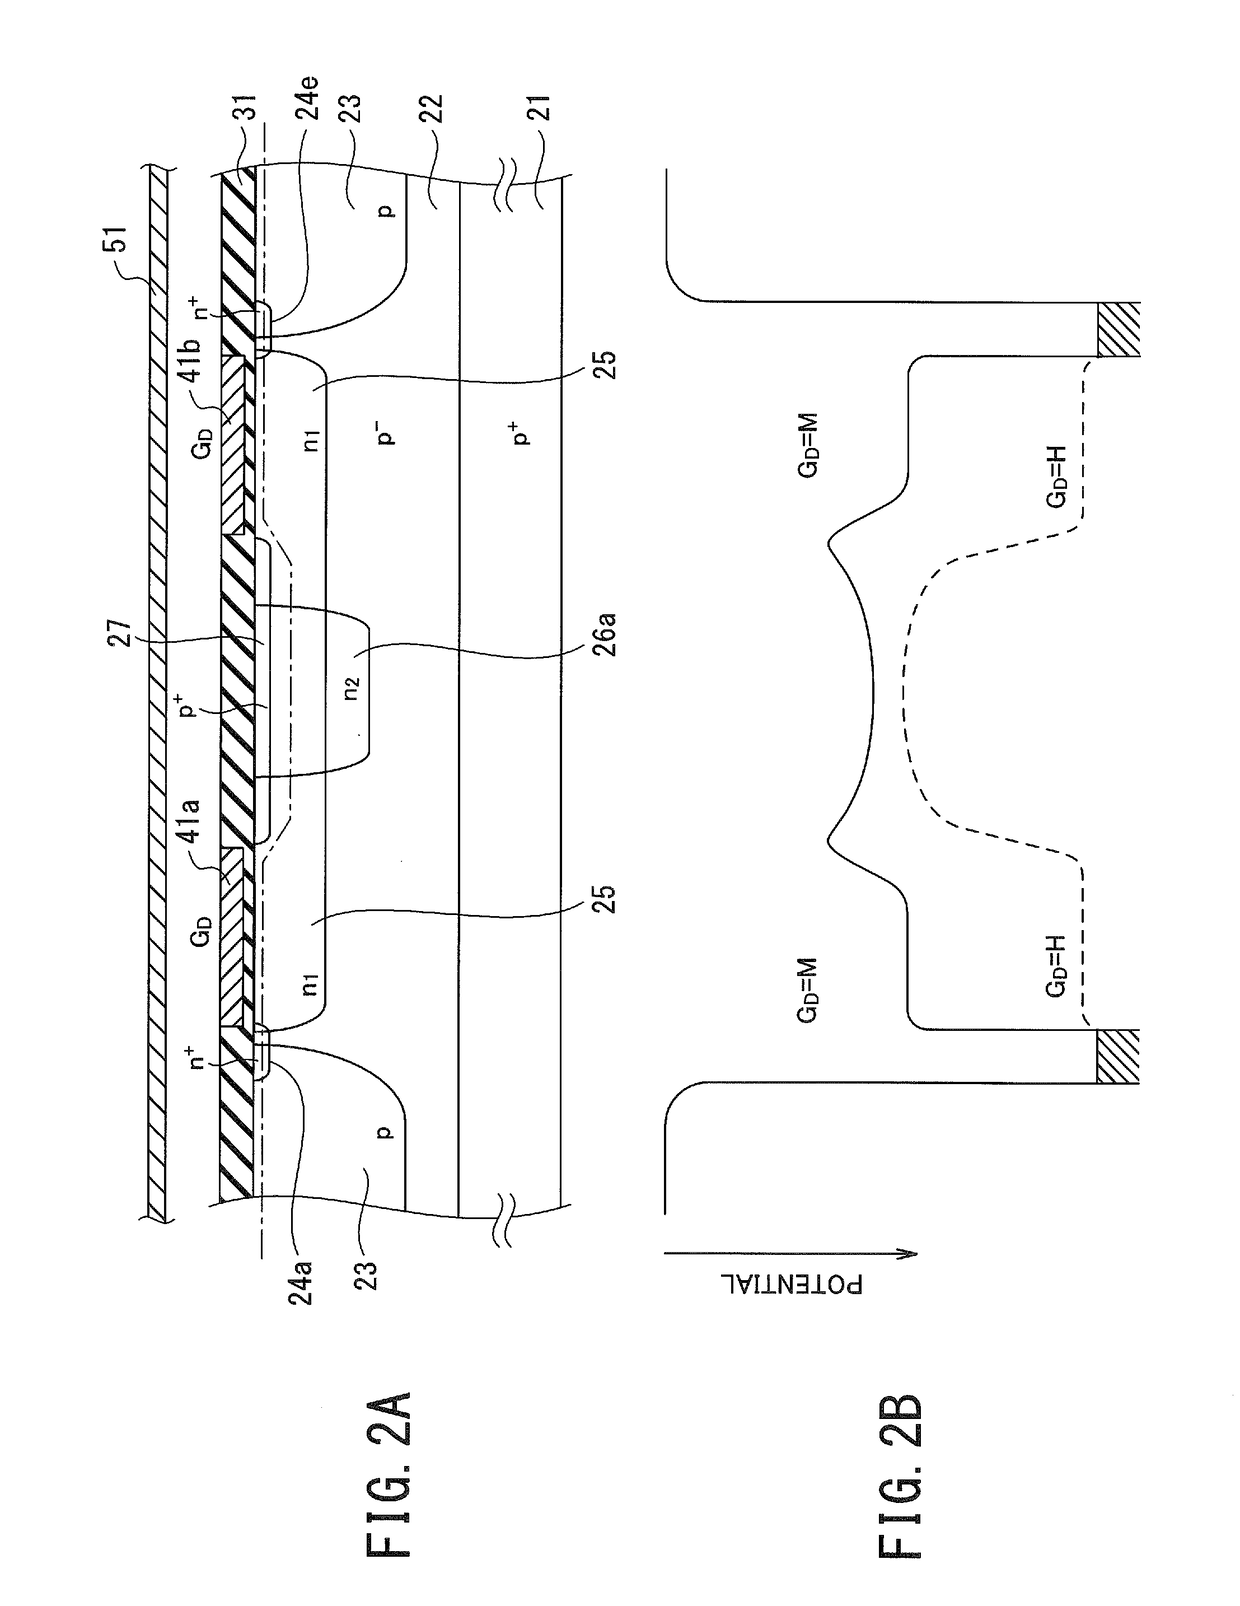 Range sensor and solid-state imaging device